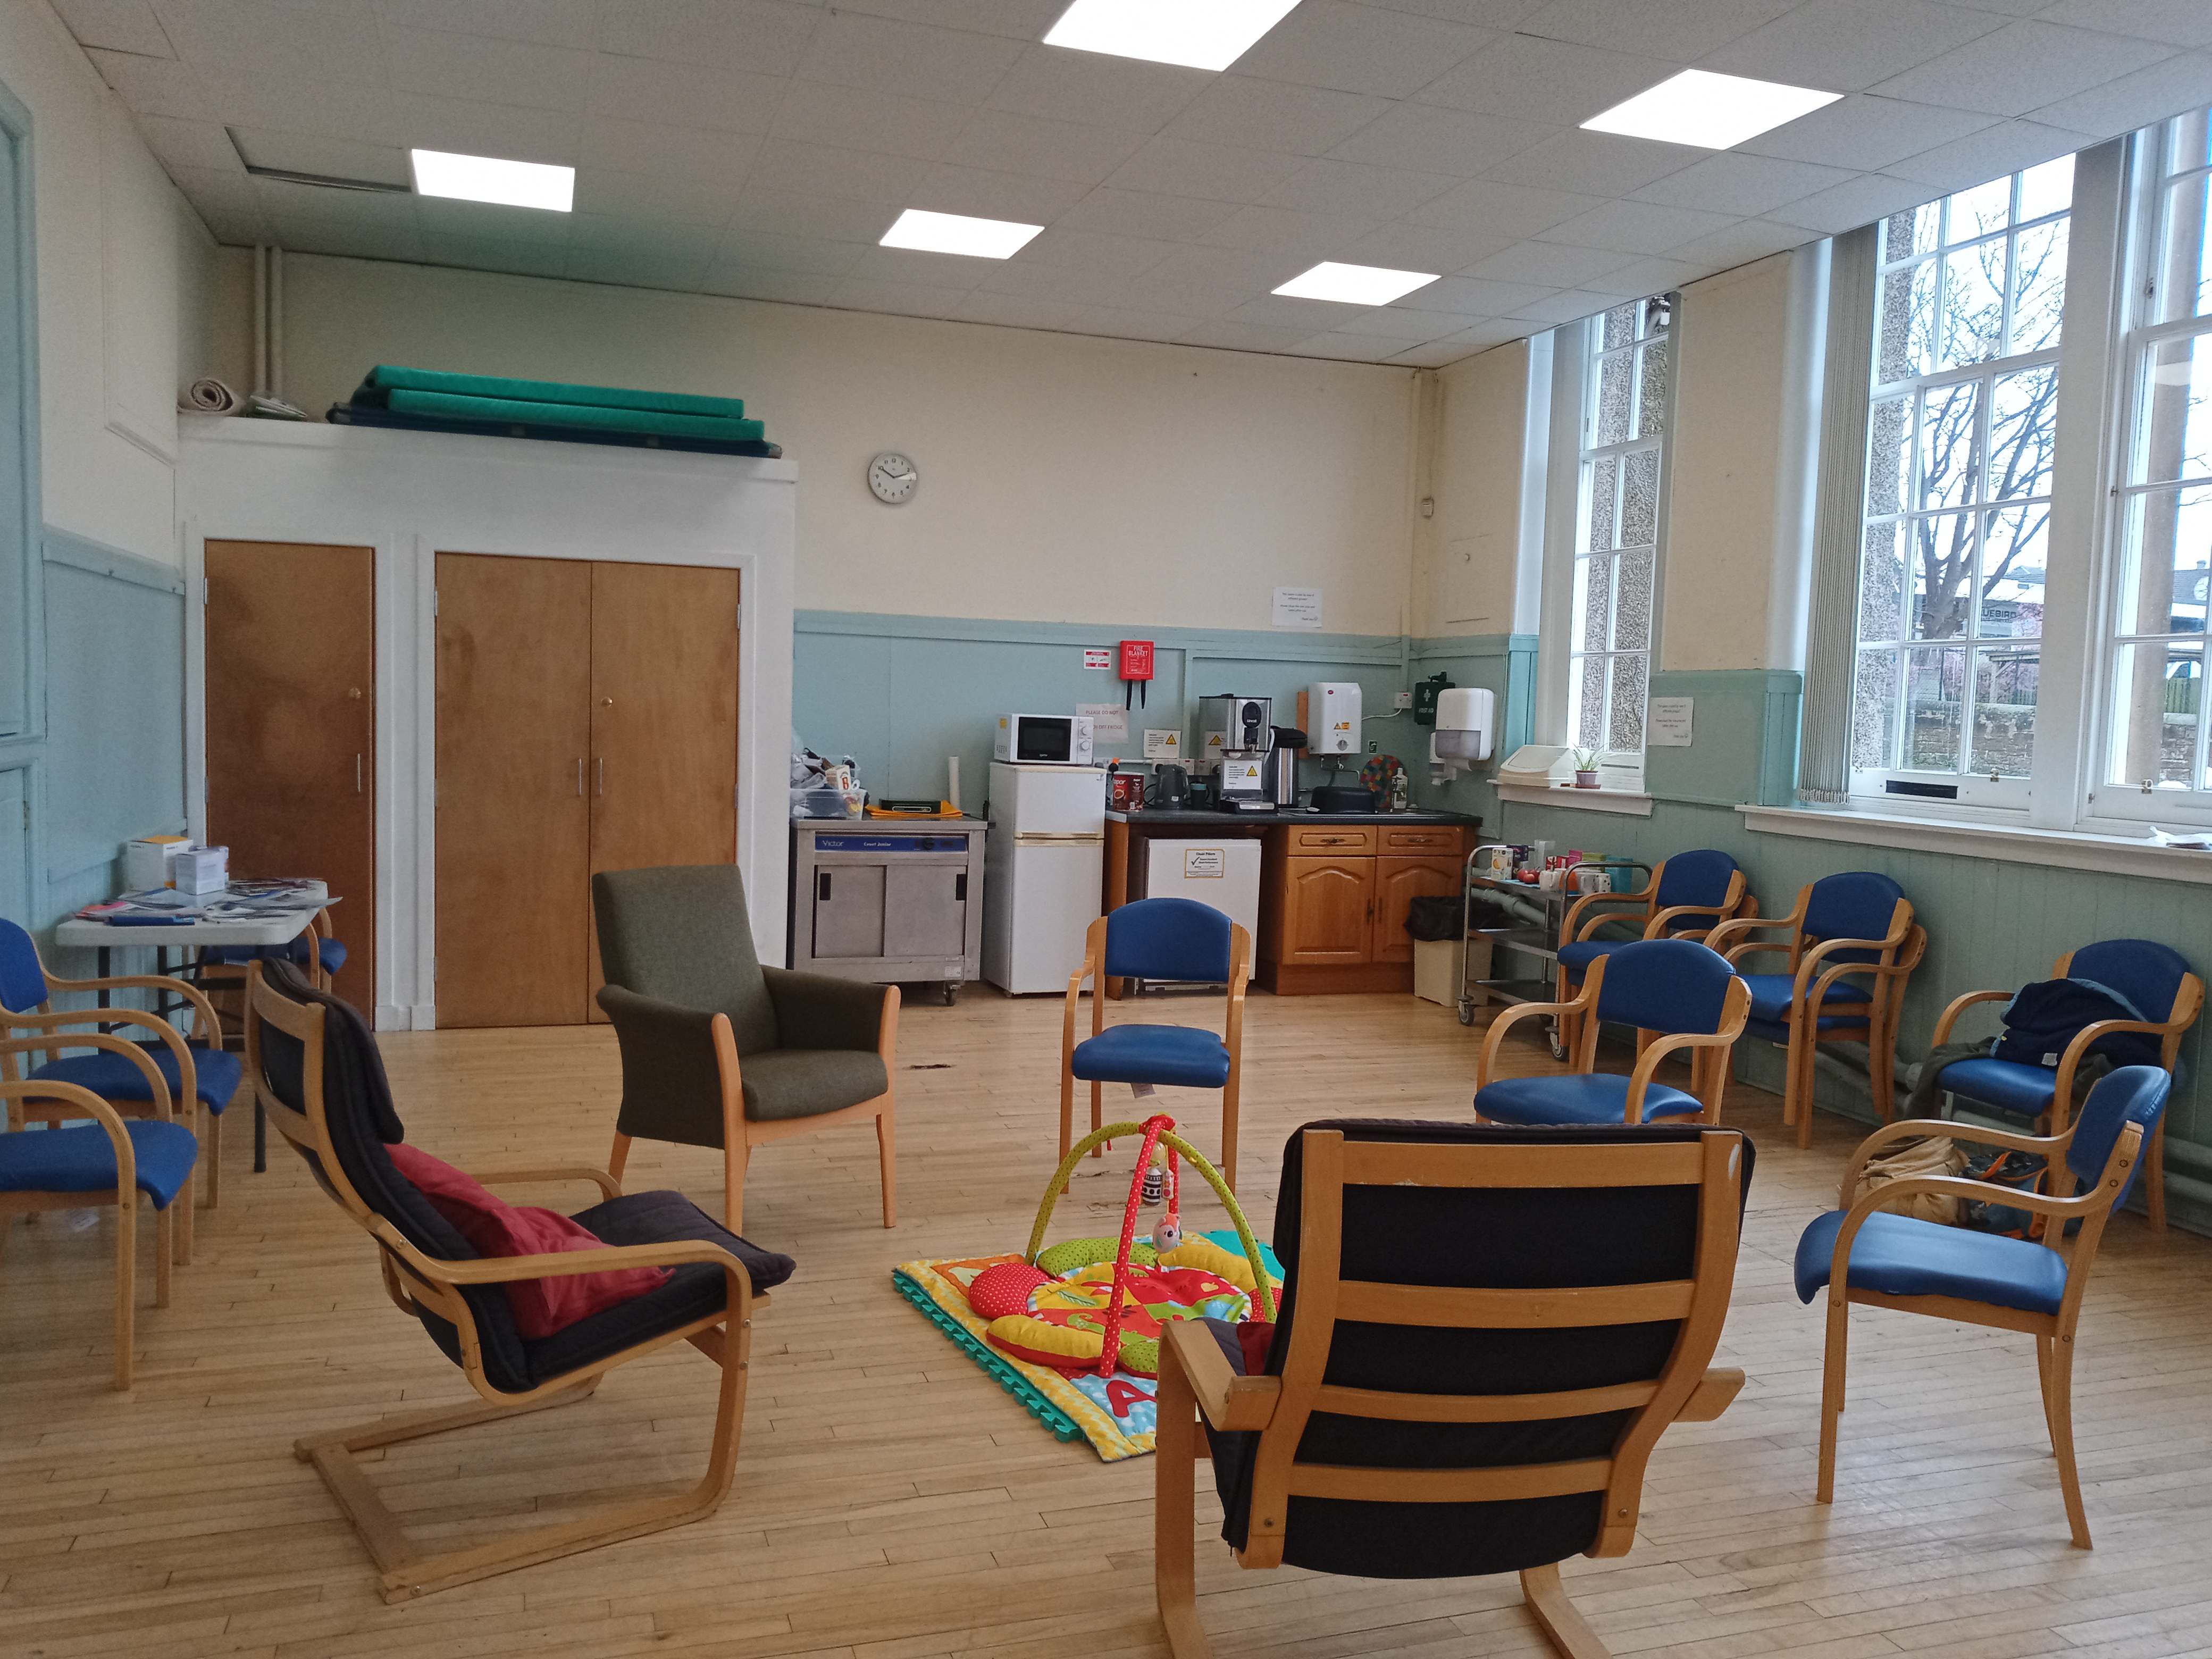 Gilmerton meeting hall with armchairs and baby toys